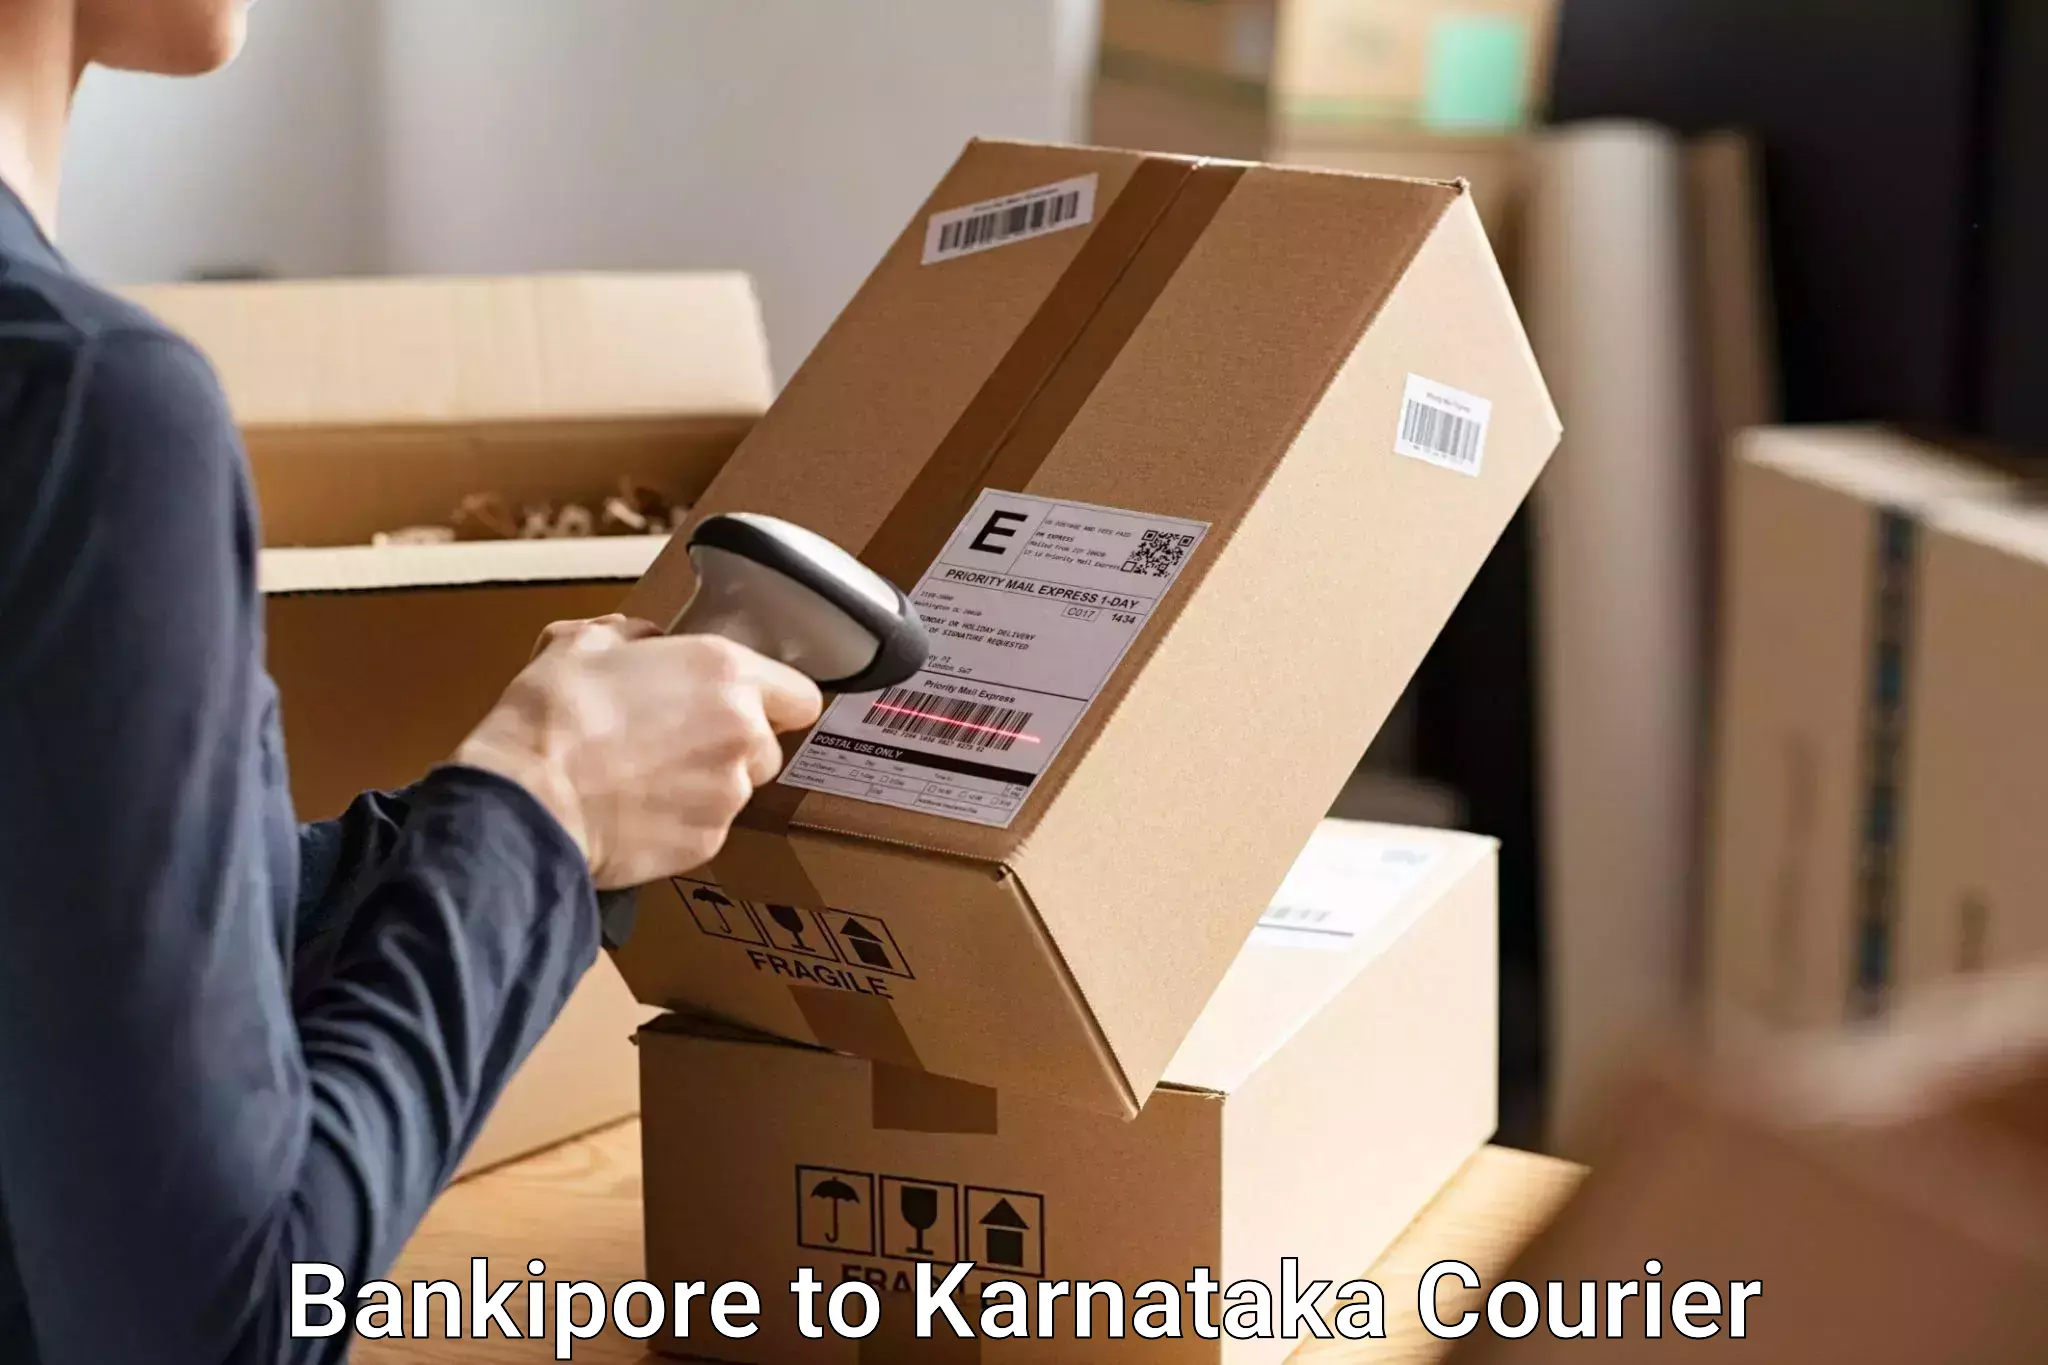 Luggage shipment specialists Bankipore to Kittur